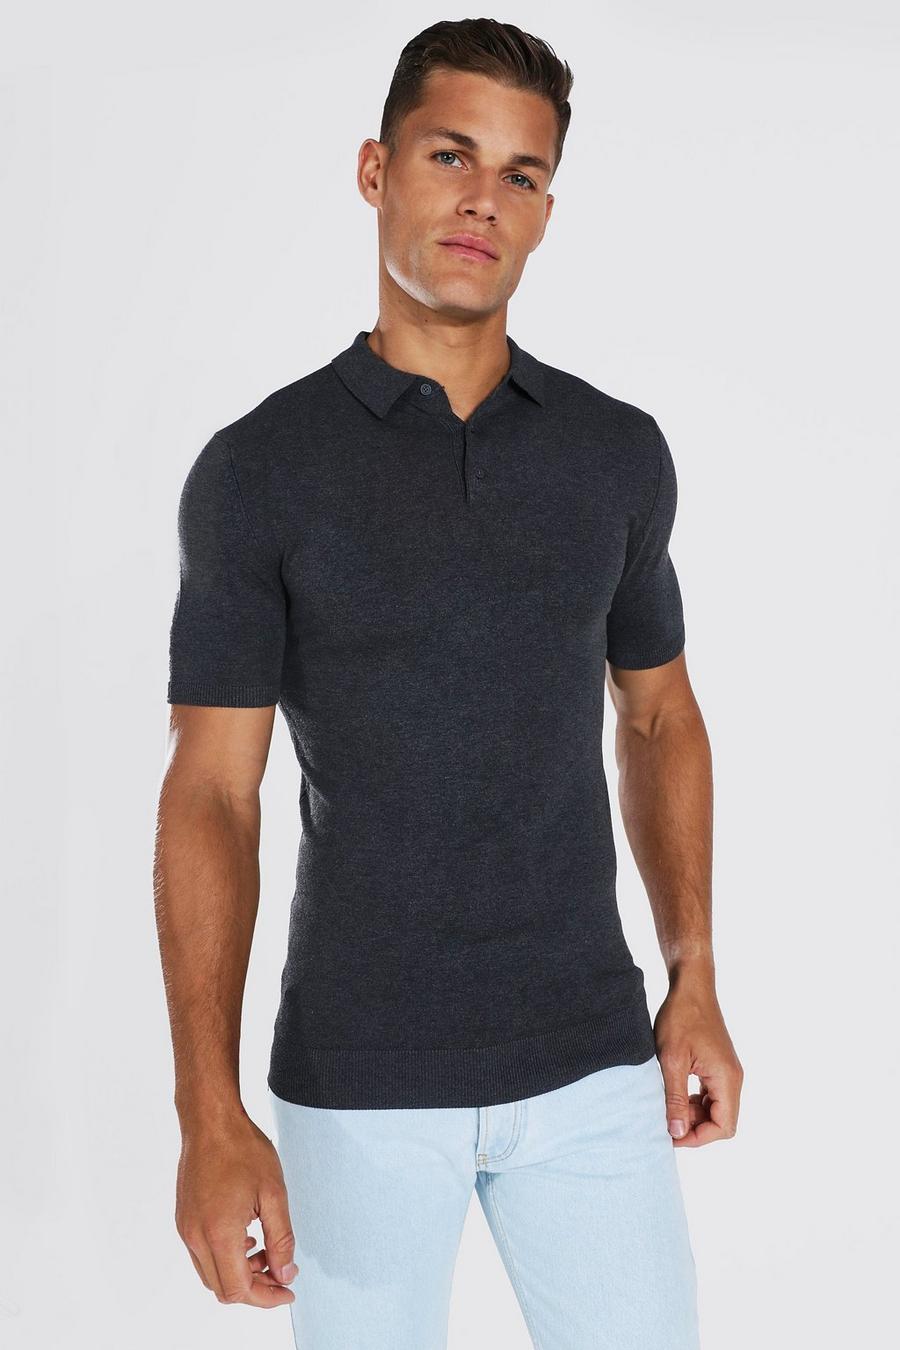 Charcoal grey Tall Recycled Muscle Fit Knitted Polo